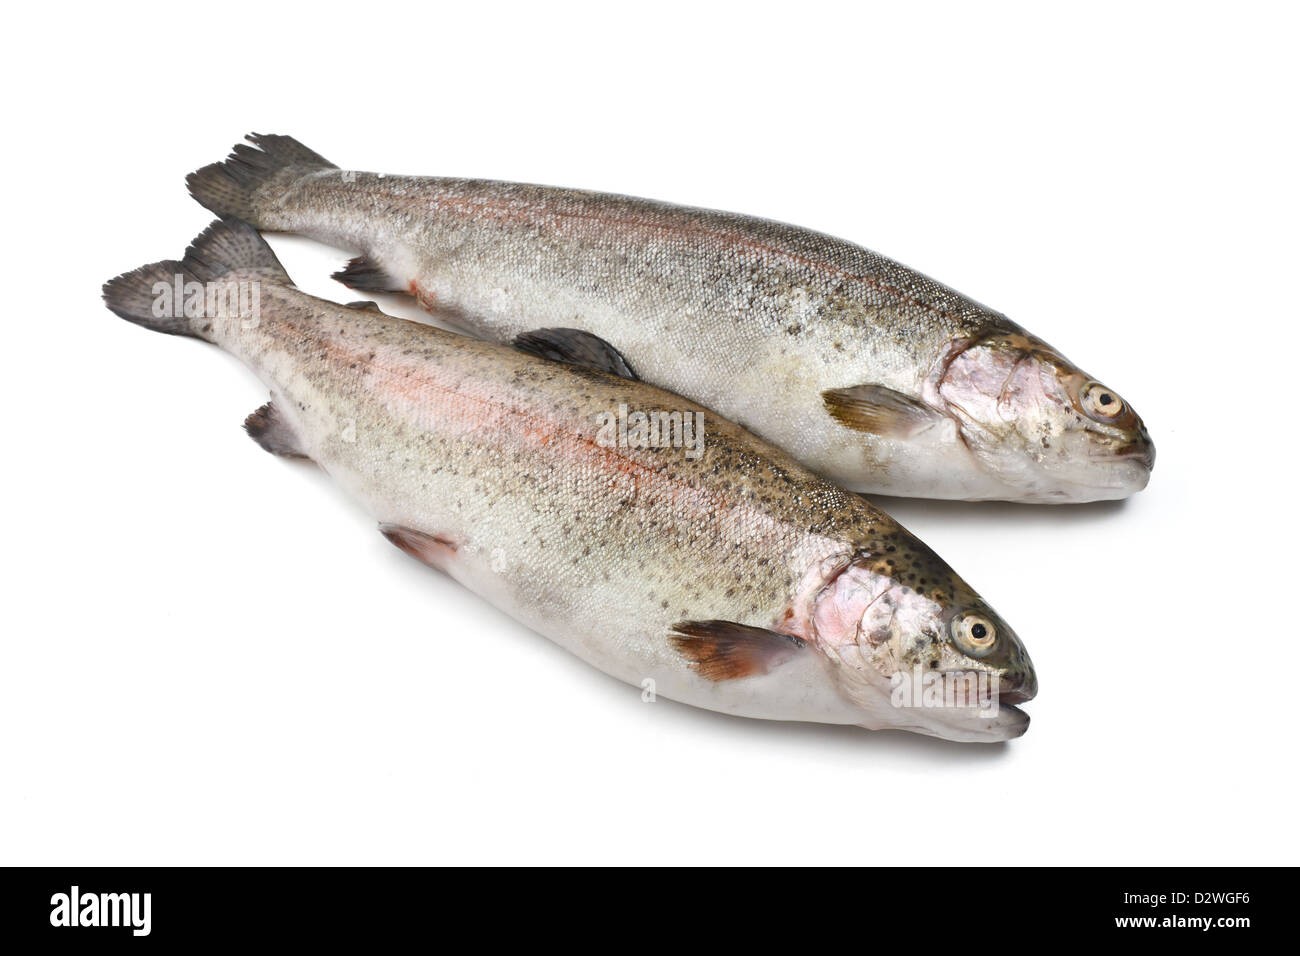 two fresh rainbow trout fish over white background Stock Photo